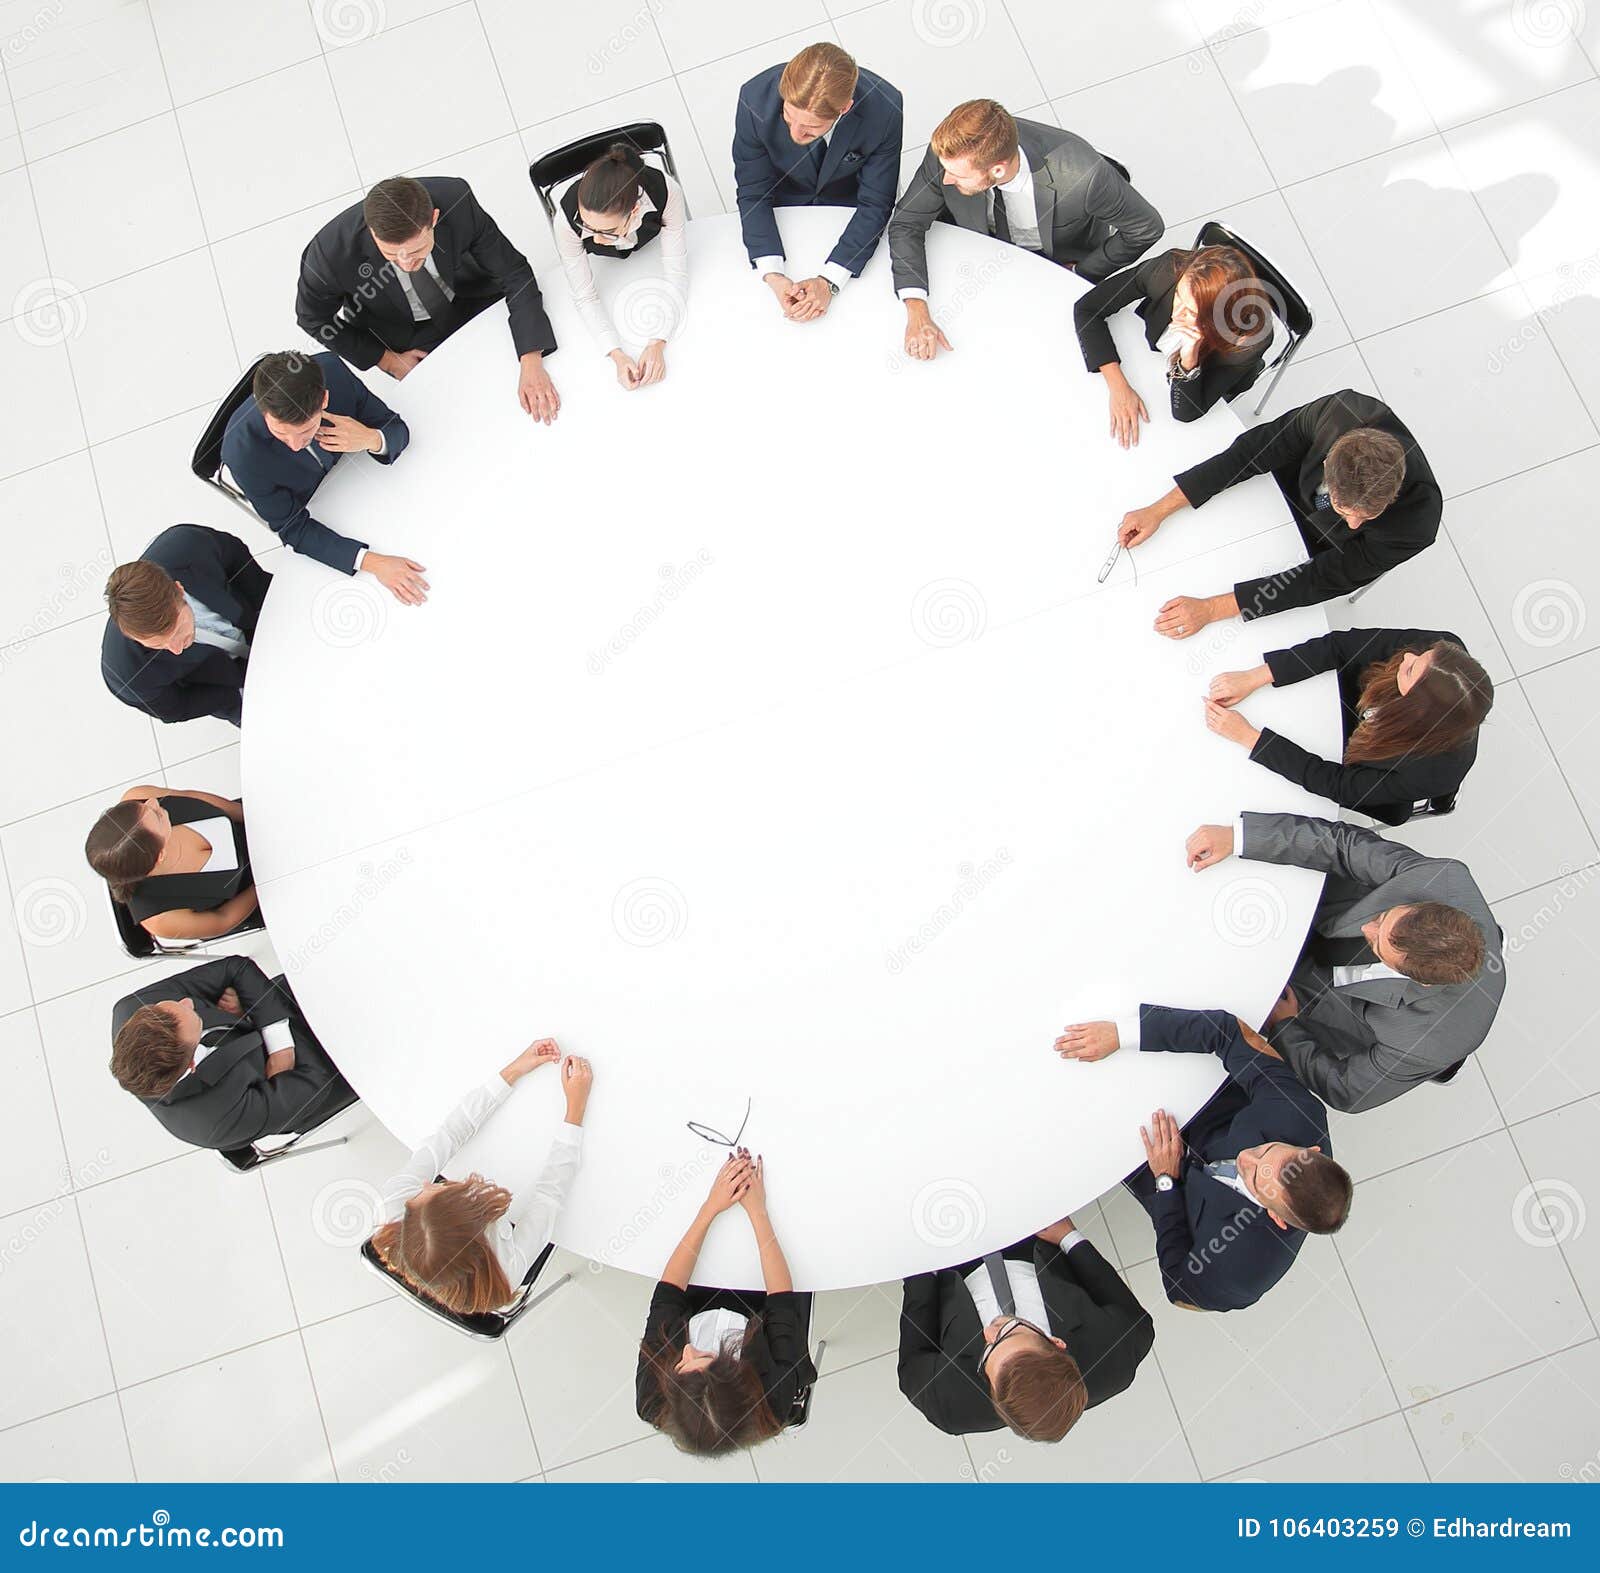 Large Group Of Business People Sitting At The Round Table The Business Concept Stock Image Image Of Brainstorming